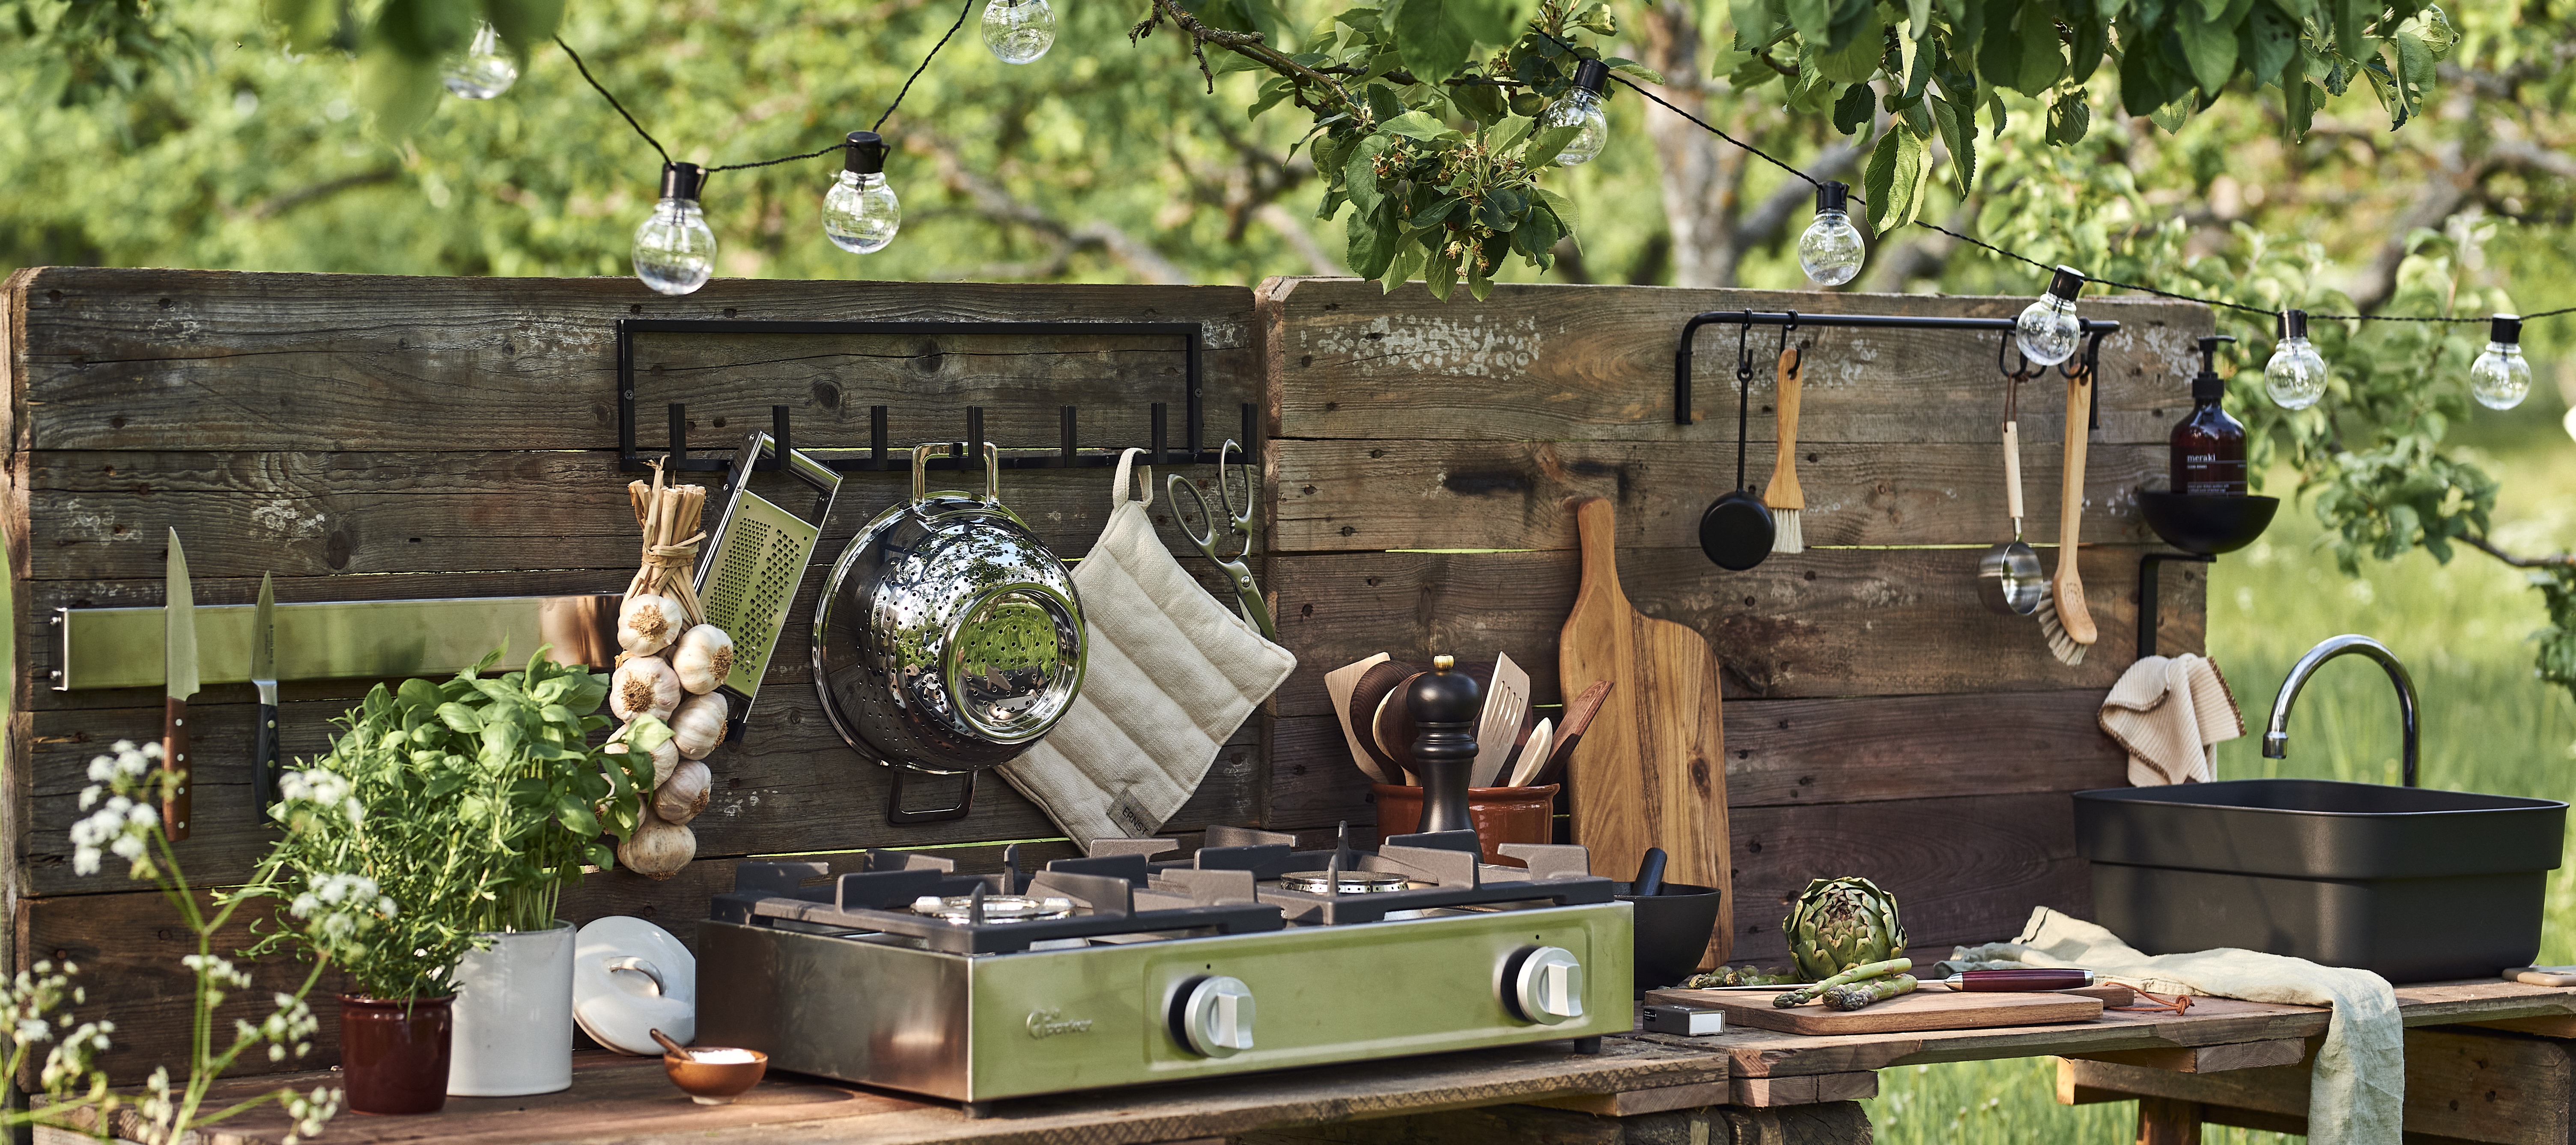 A simple DIY outdoor kitchen with pallets